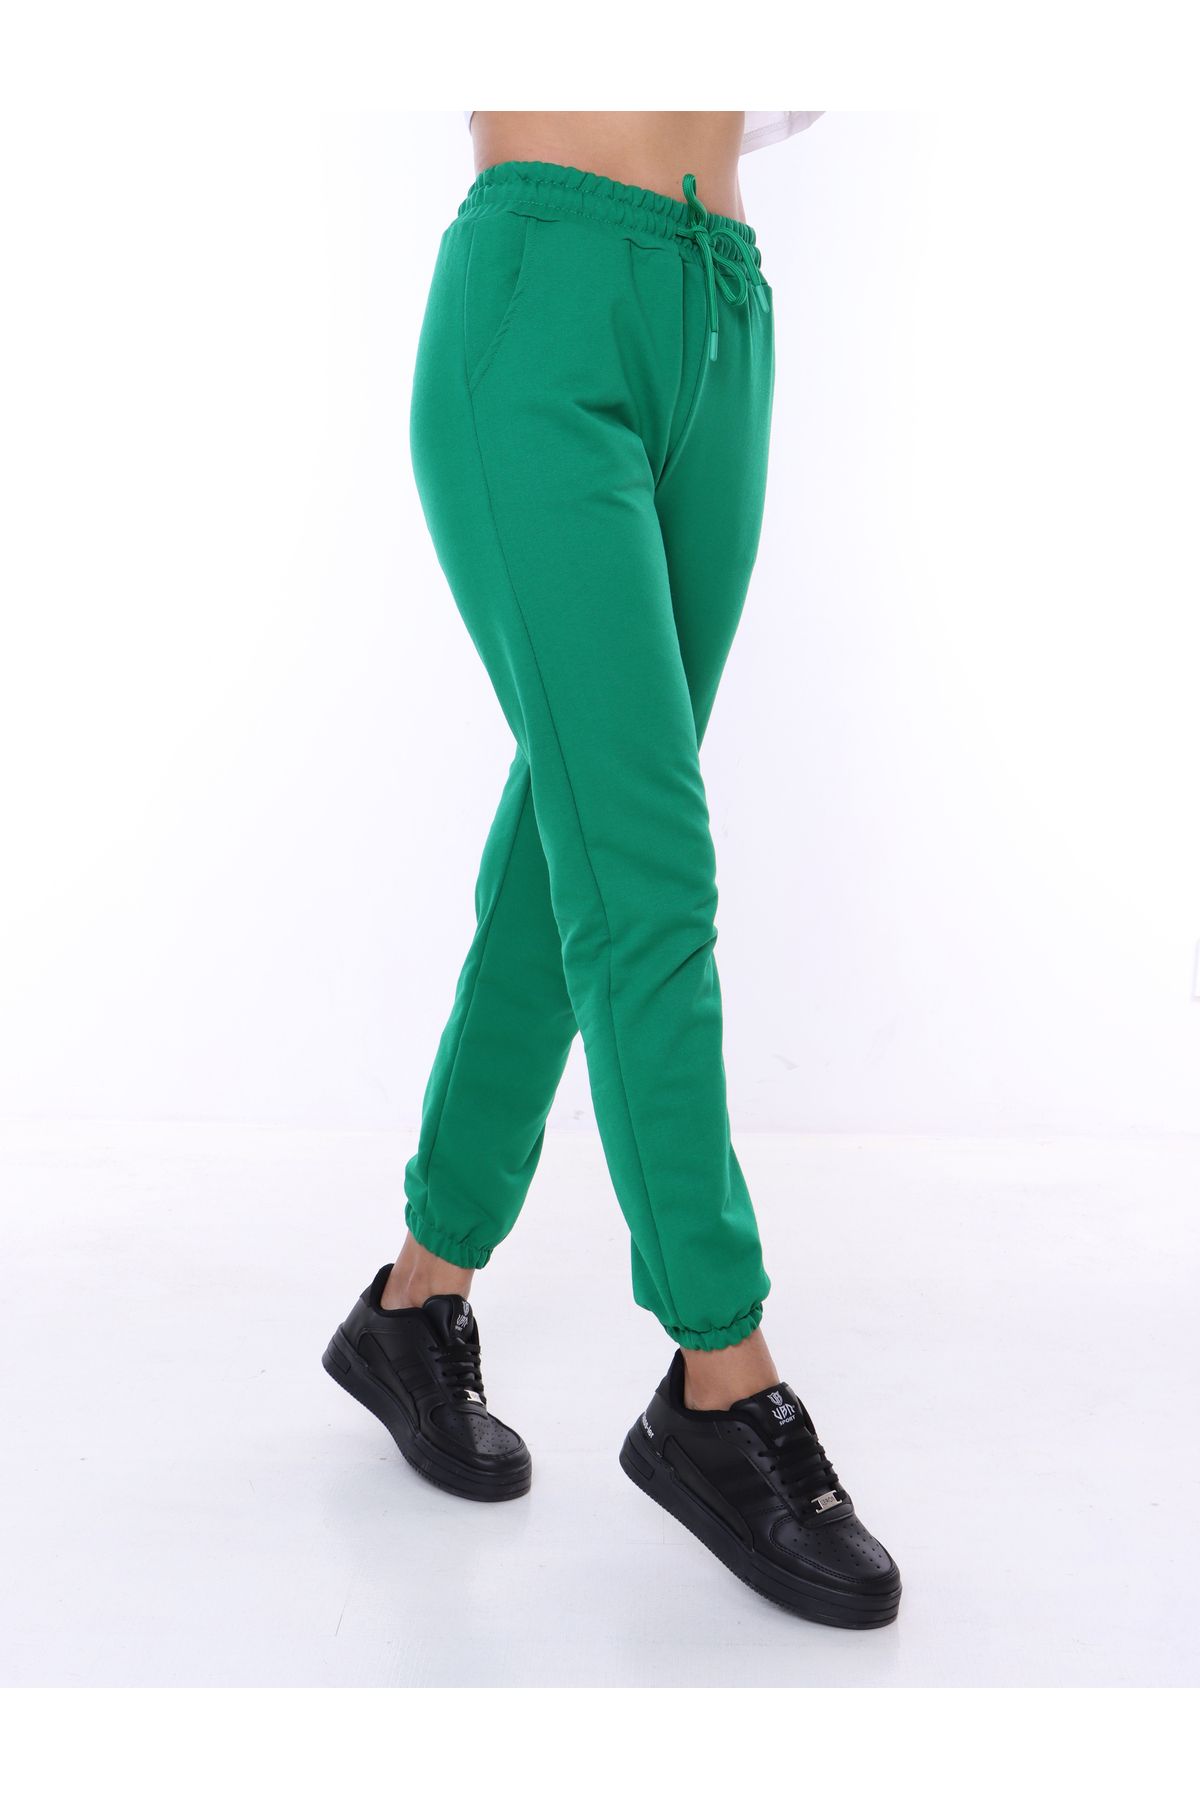 TİGERS TİGERSS women's seasonal tracksuit bottoms with pockets and elastic  waist and leg hems - Trendyol